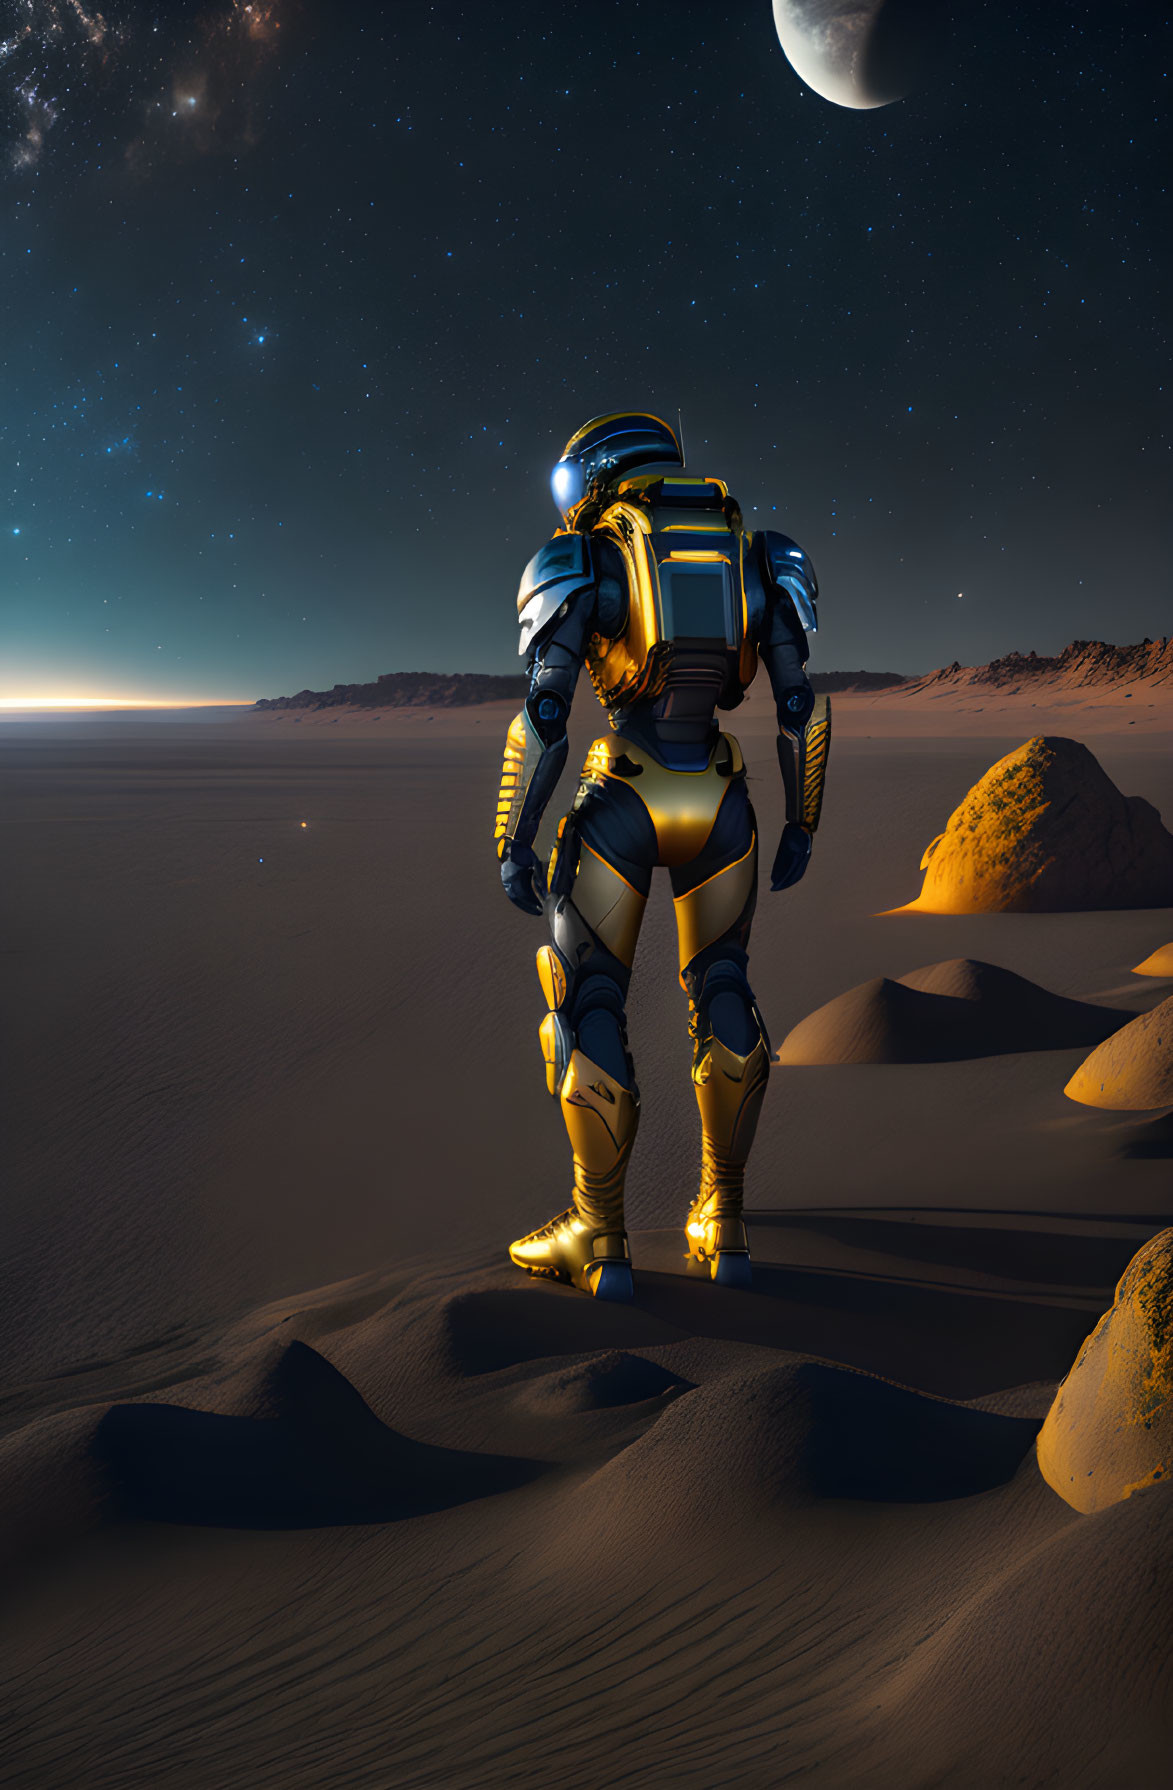 Astronaut in Gold and White Suit in Desert Night Sky